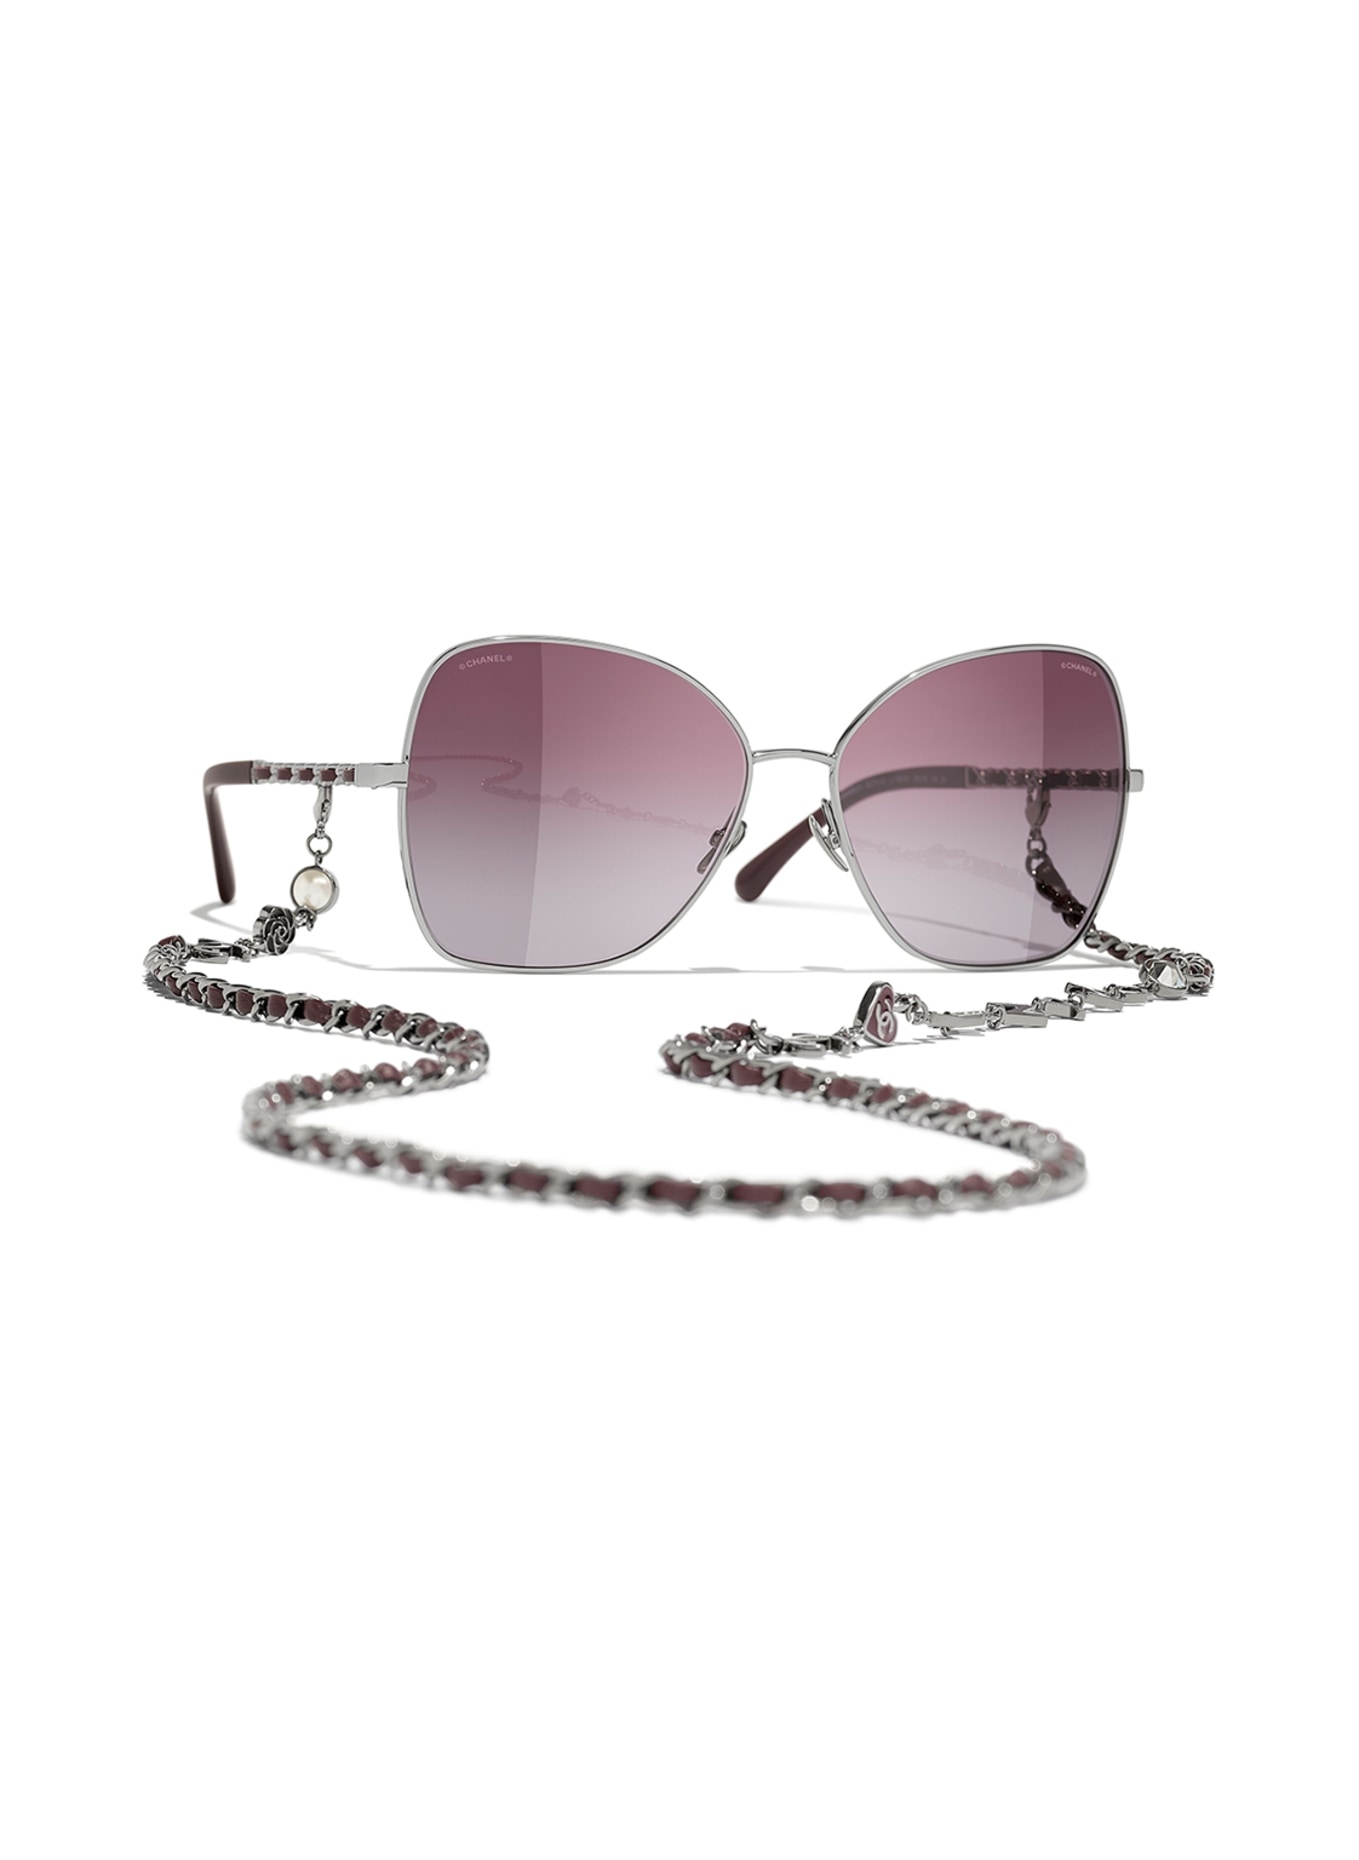 butterfly chanel sunglasses